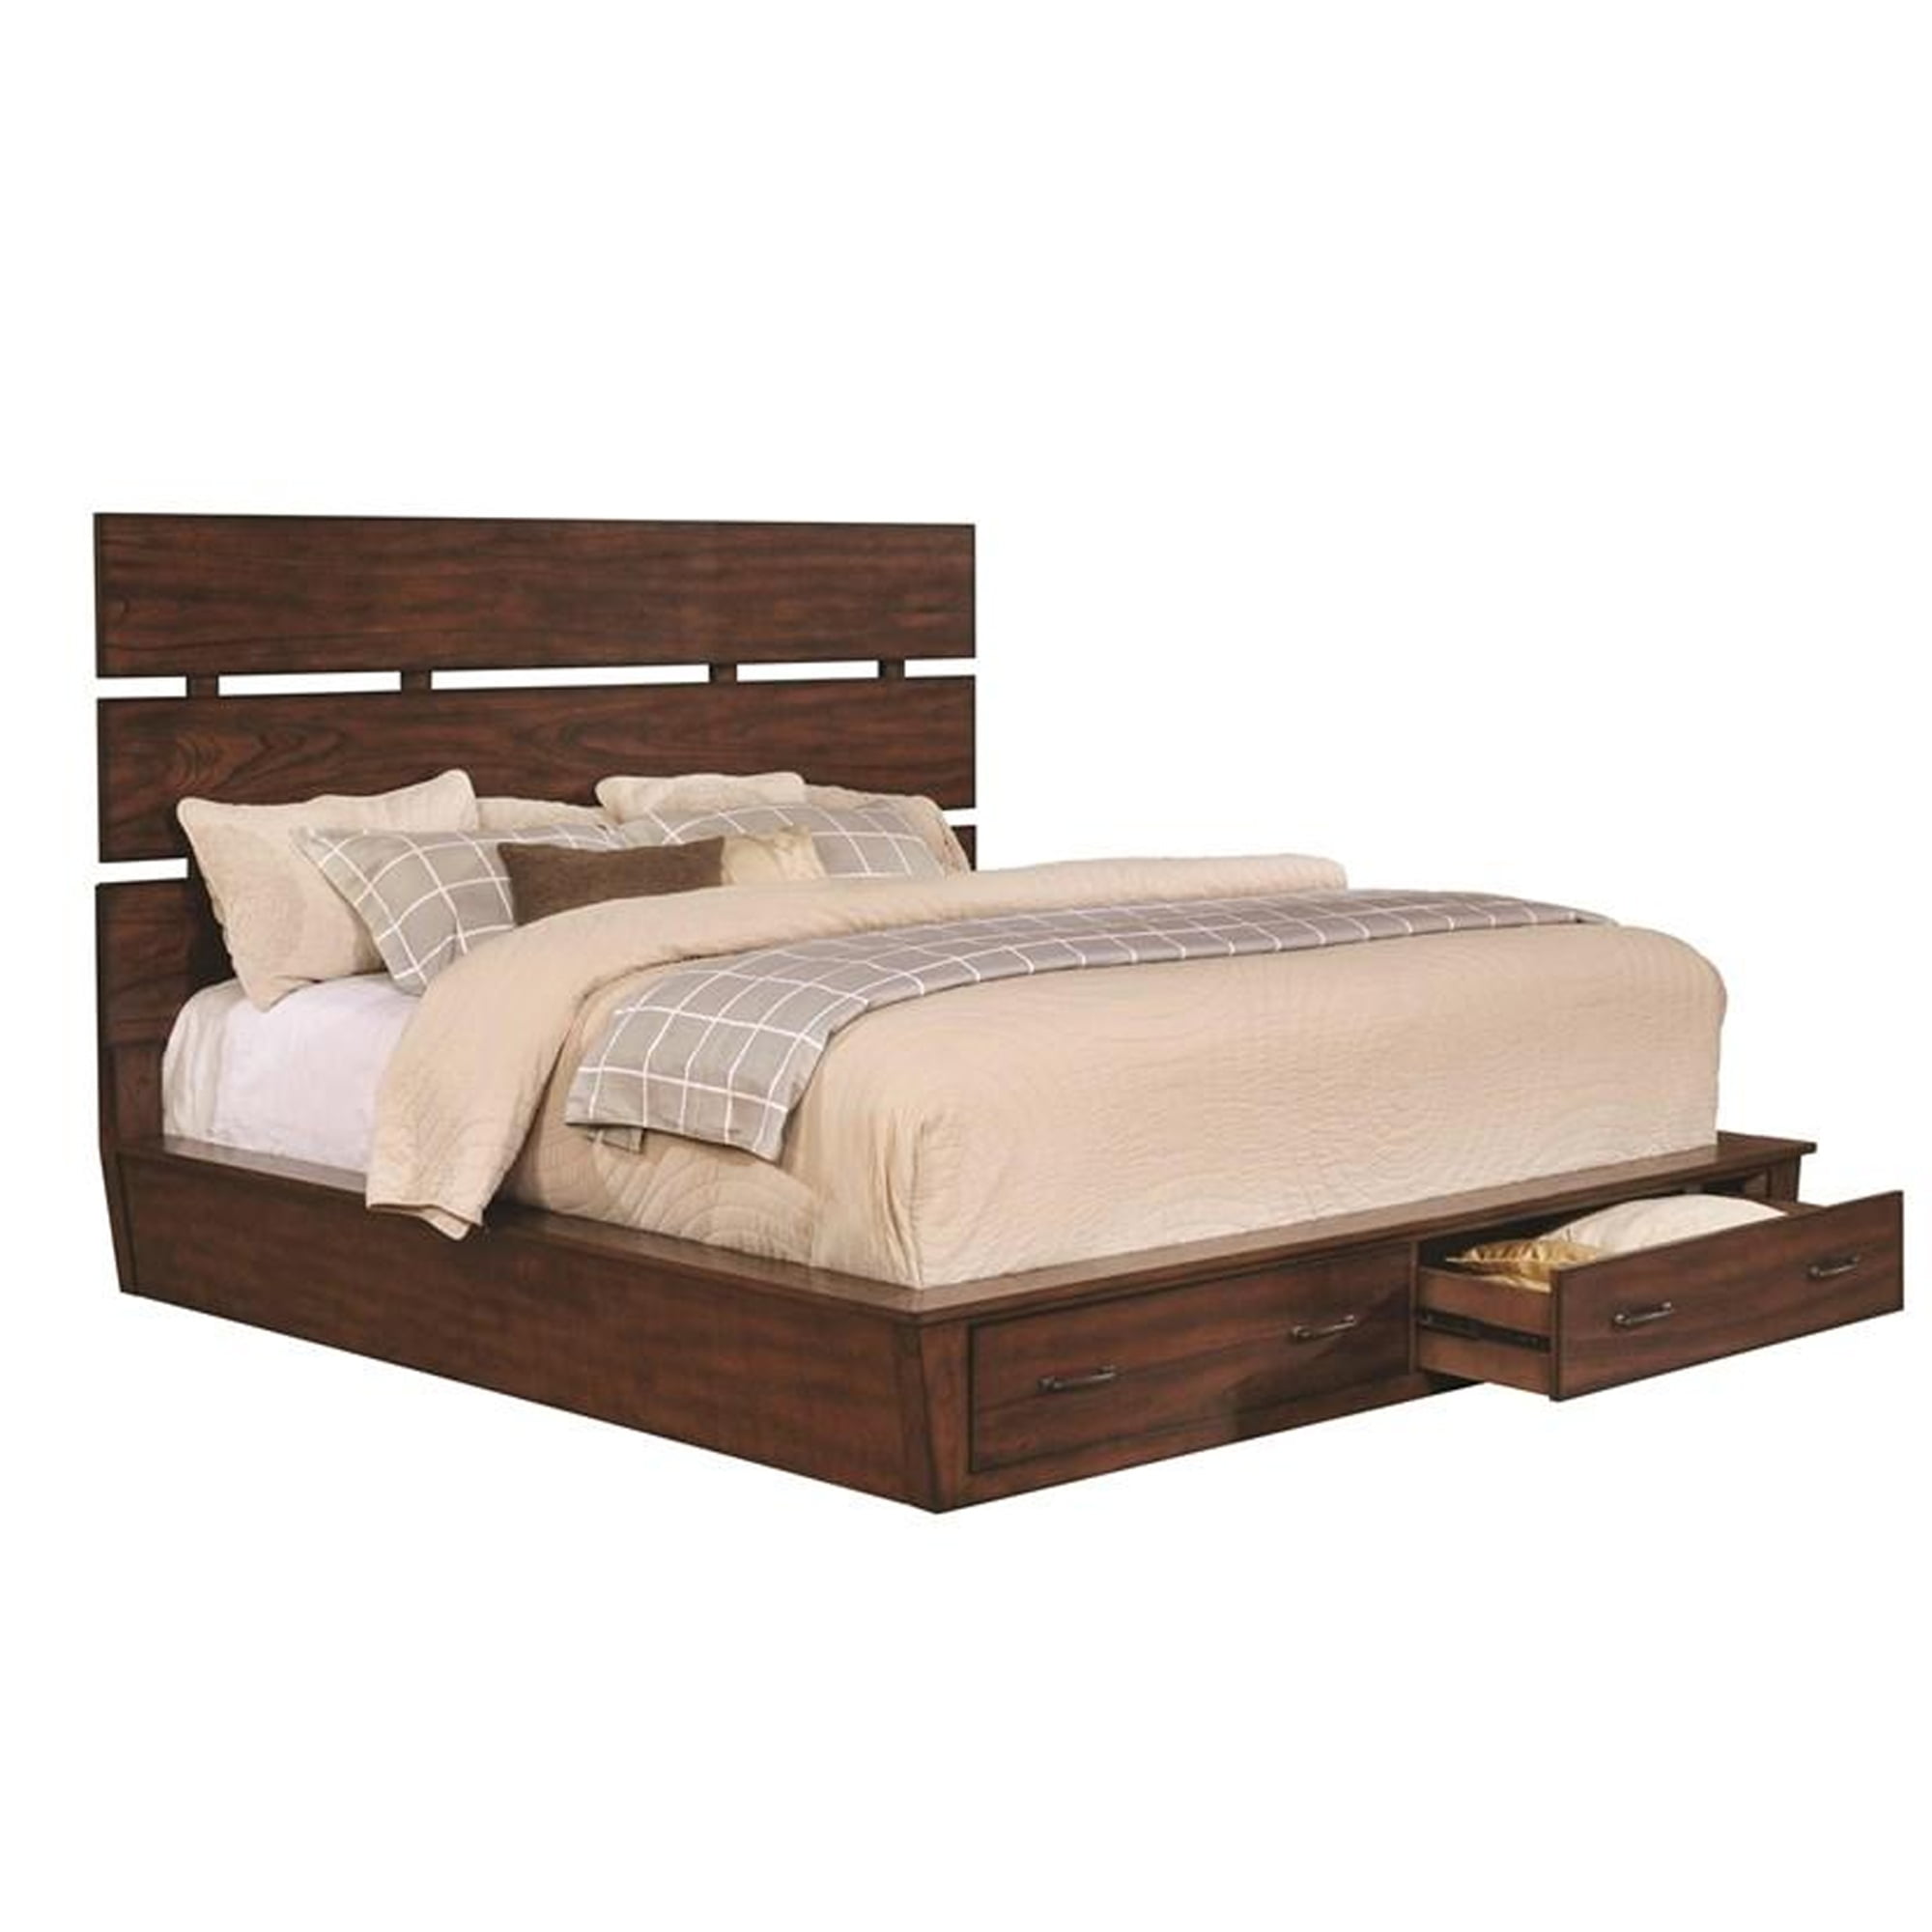 Wooden Queen Size Bed With Slatted Headboard And Two Base Drawers Brown